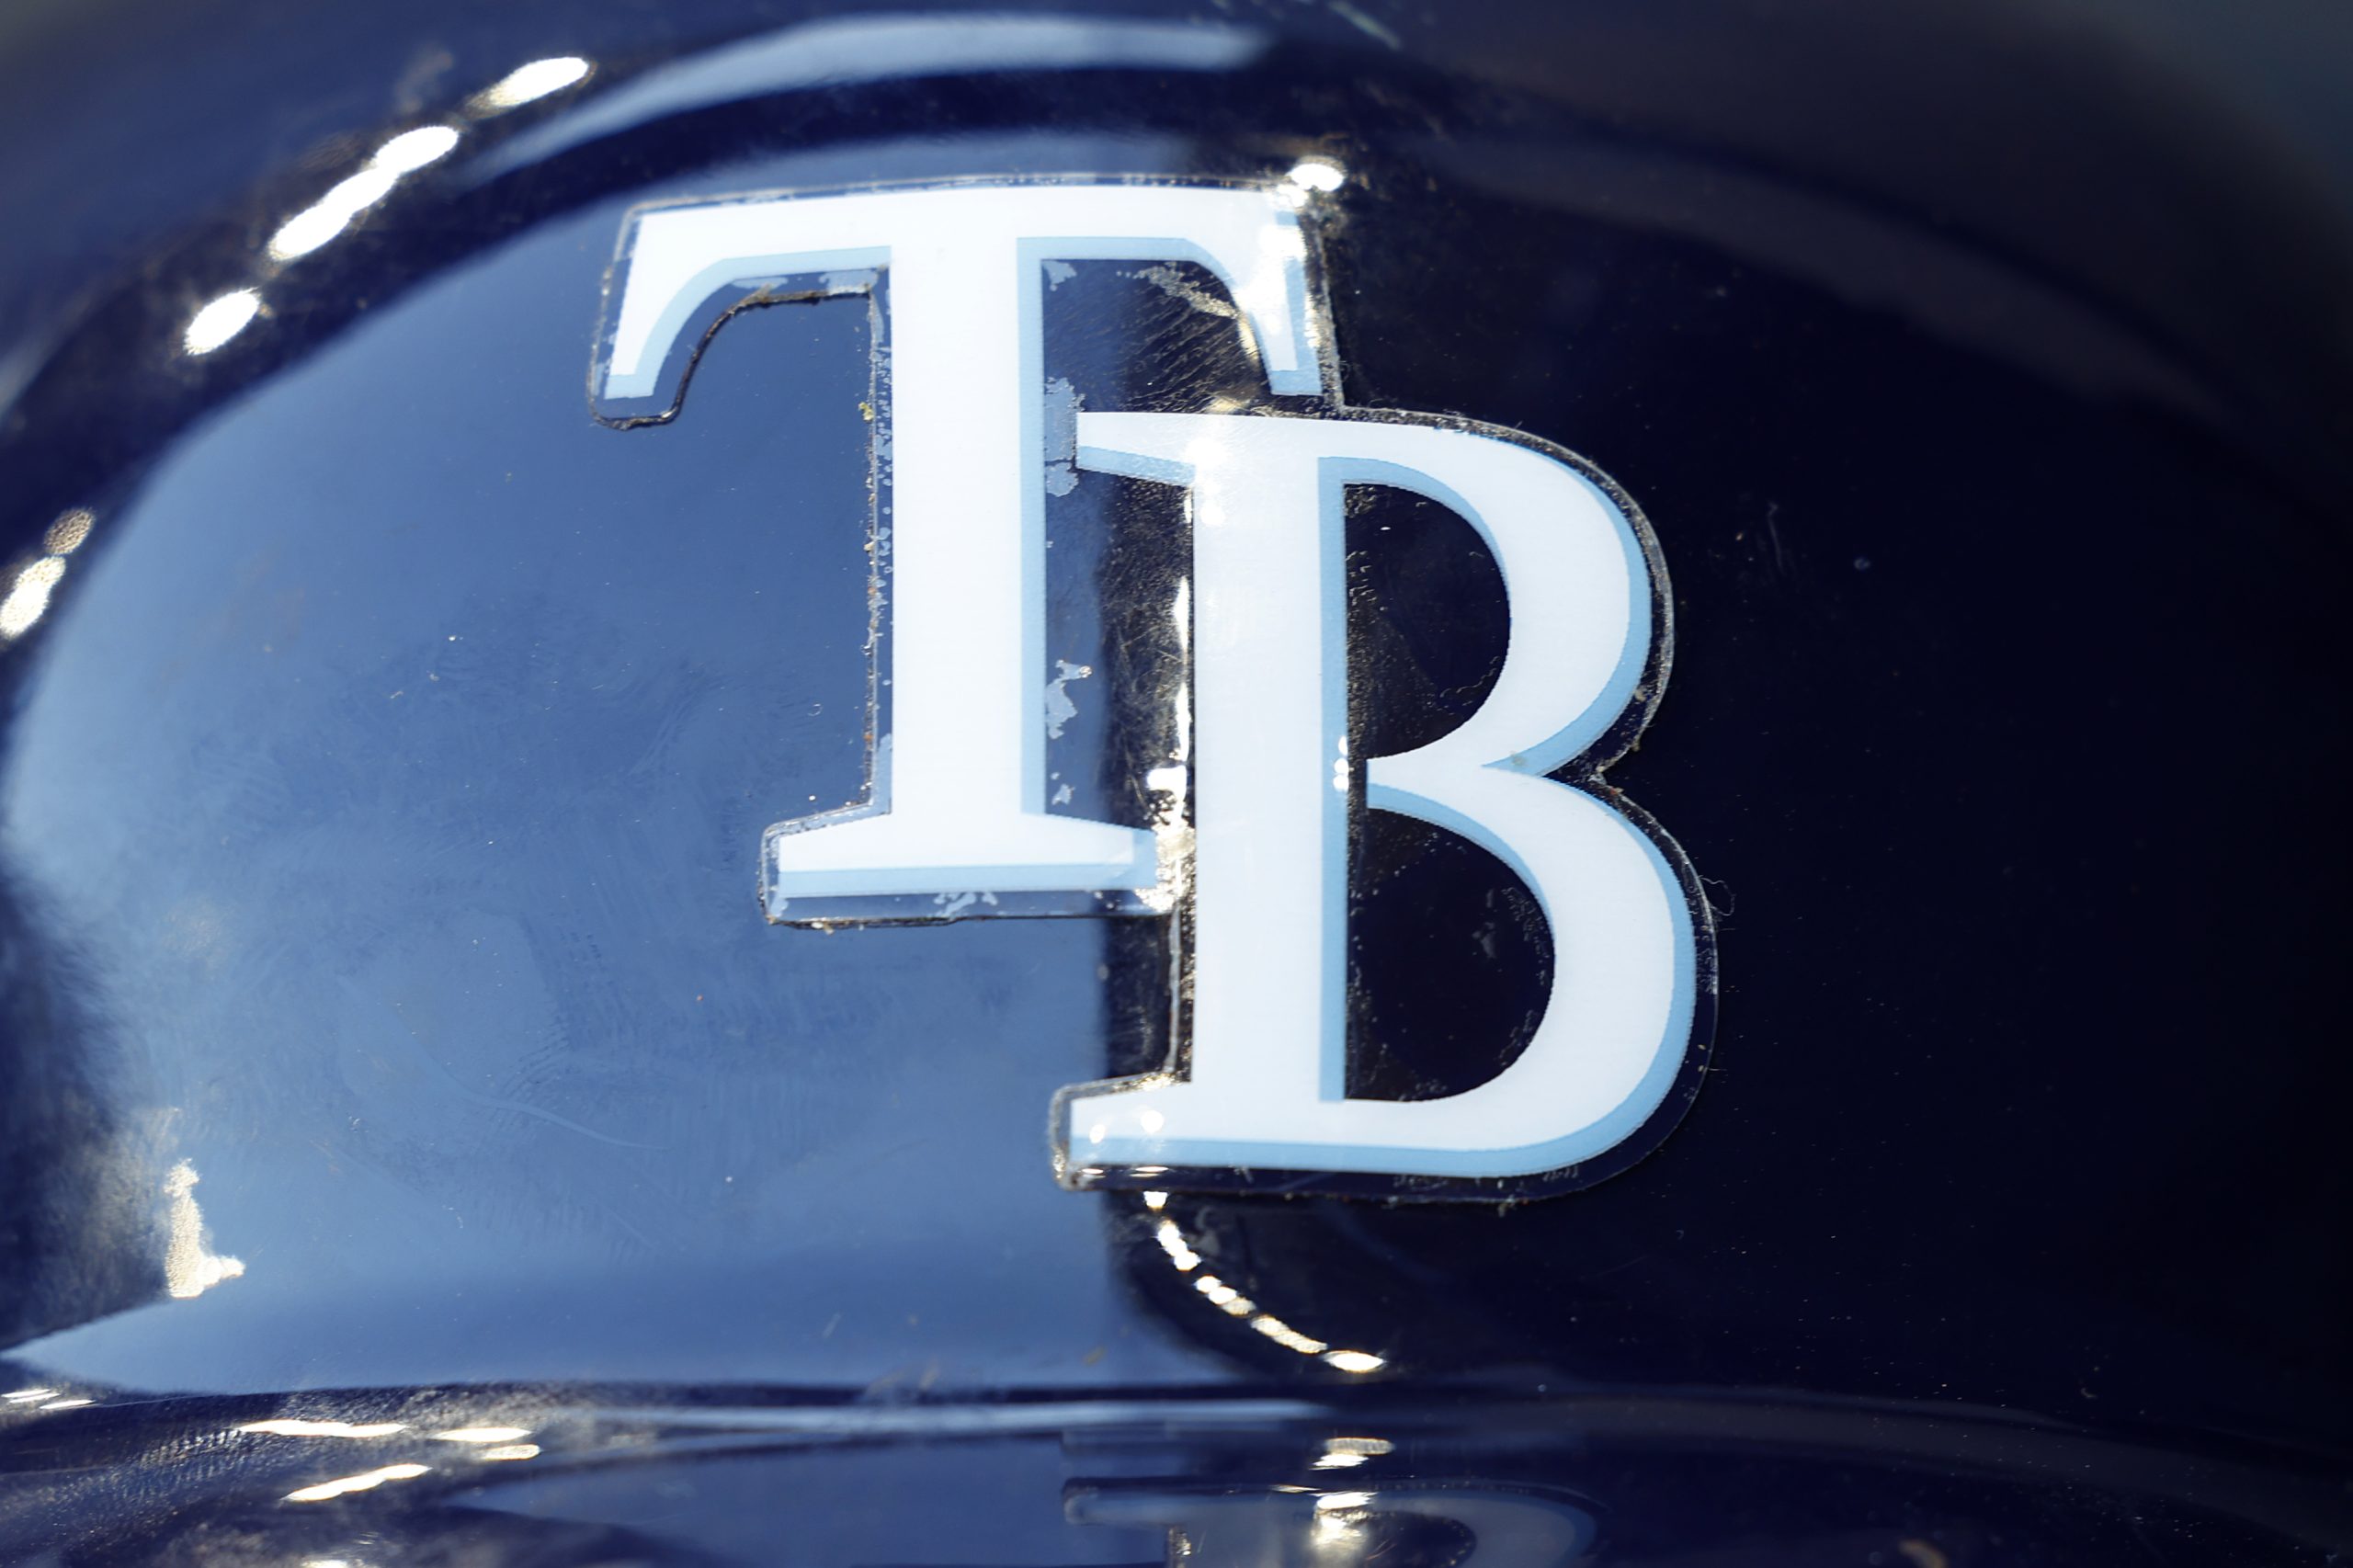 Tampa Bay Rays - You wanted more Devil Rays? You got